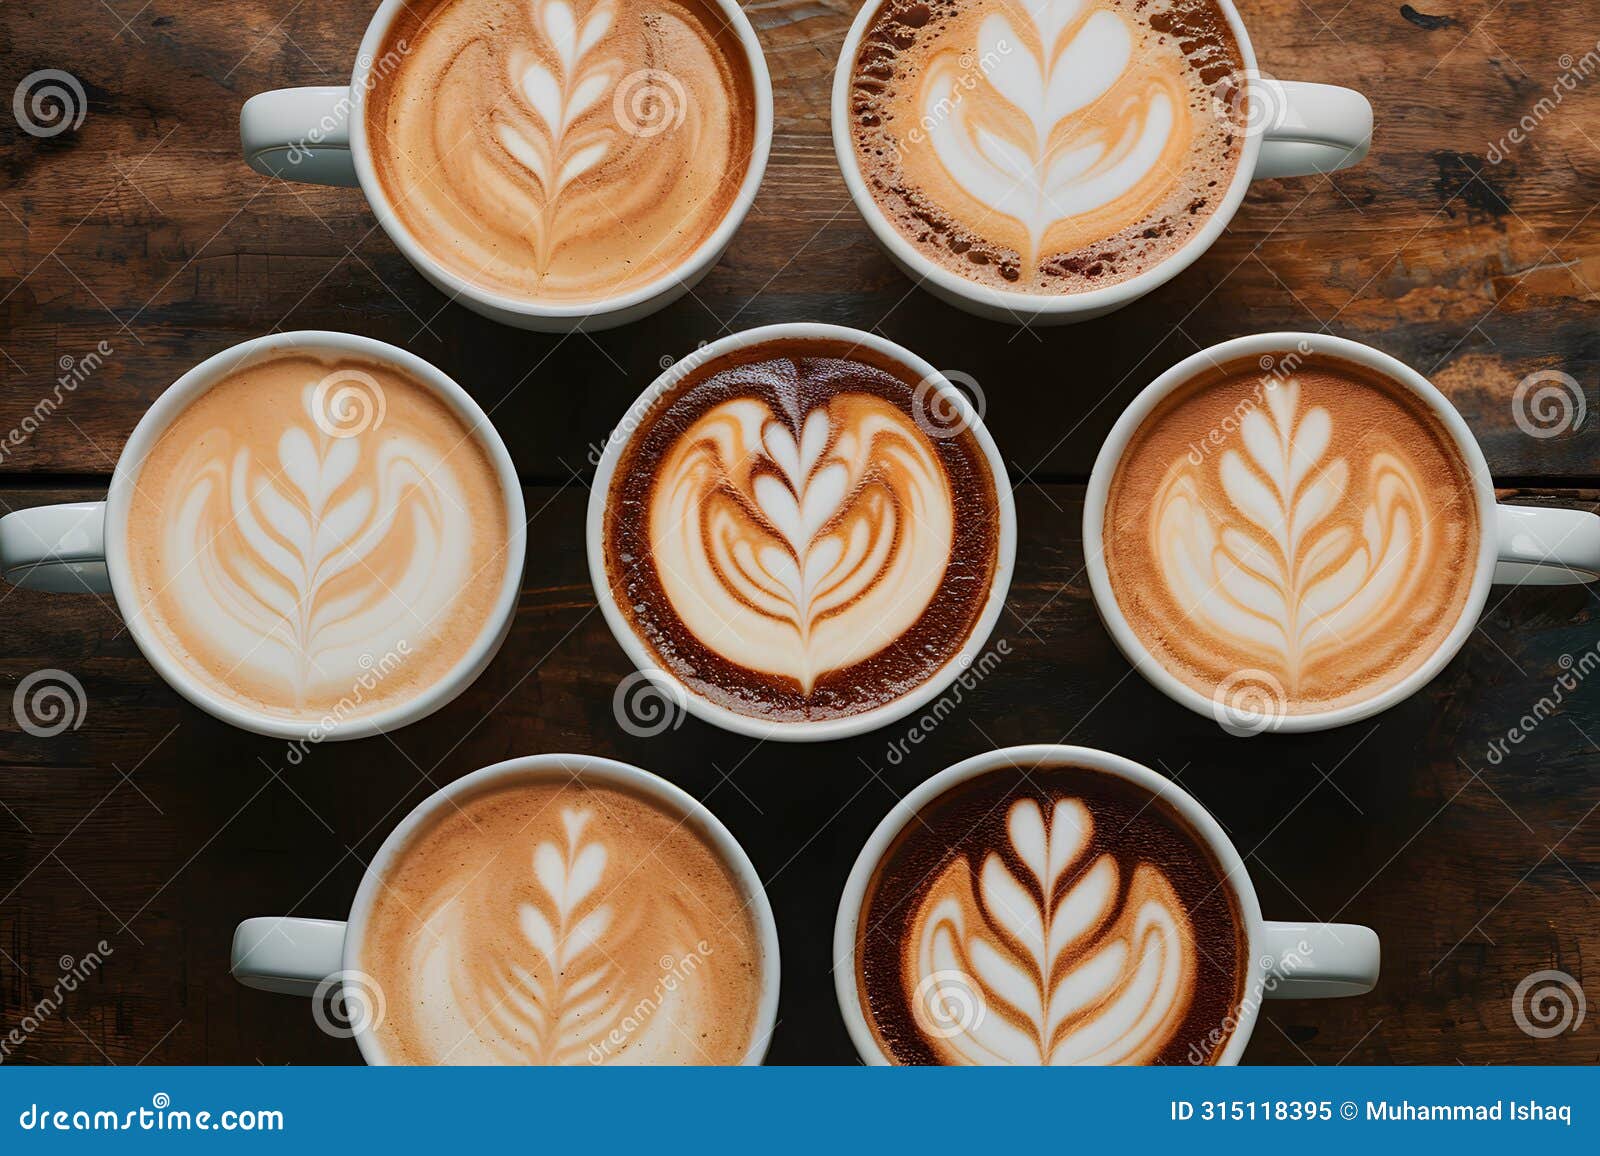 stockphoto a variety of cup macchiatos presented in top view